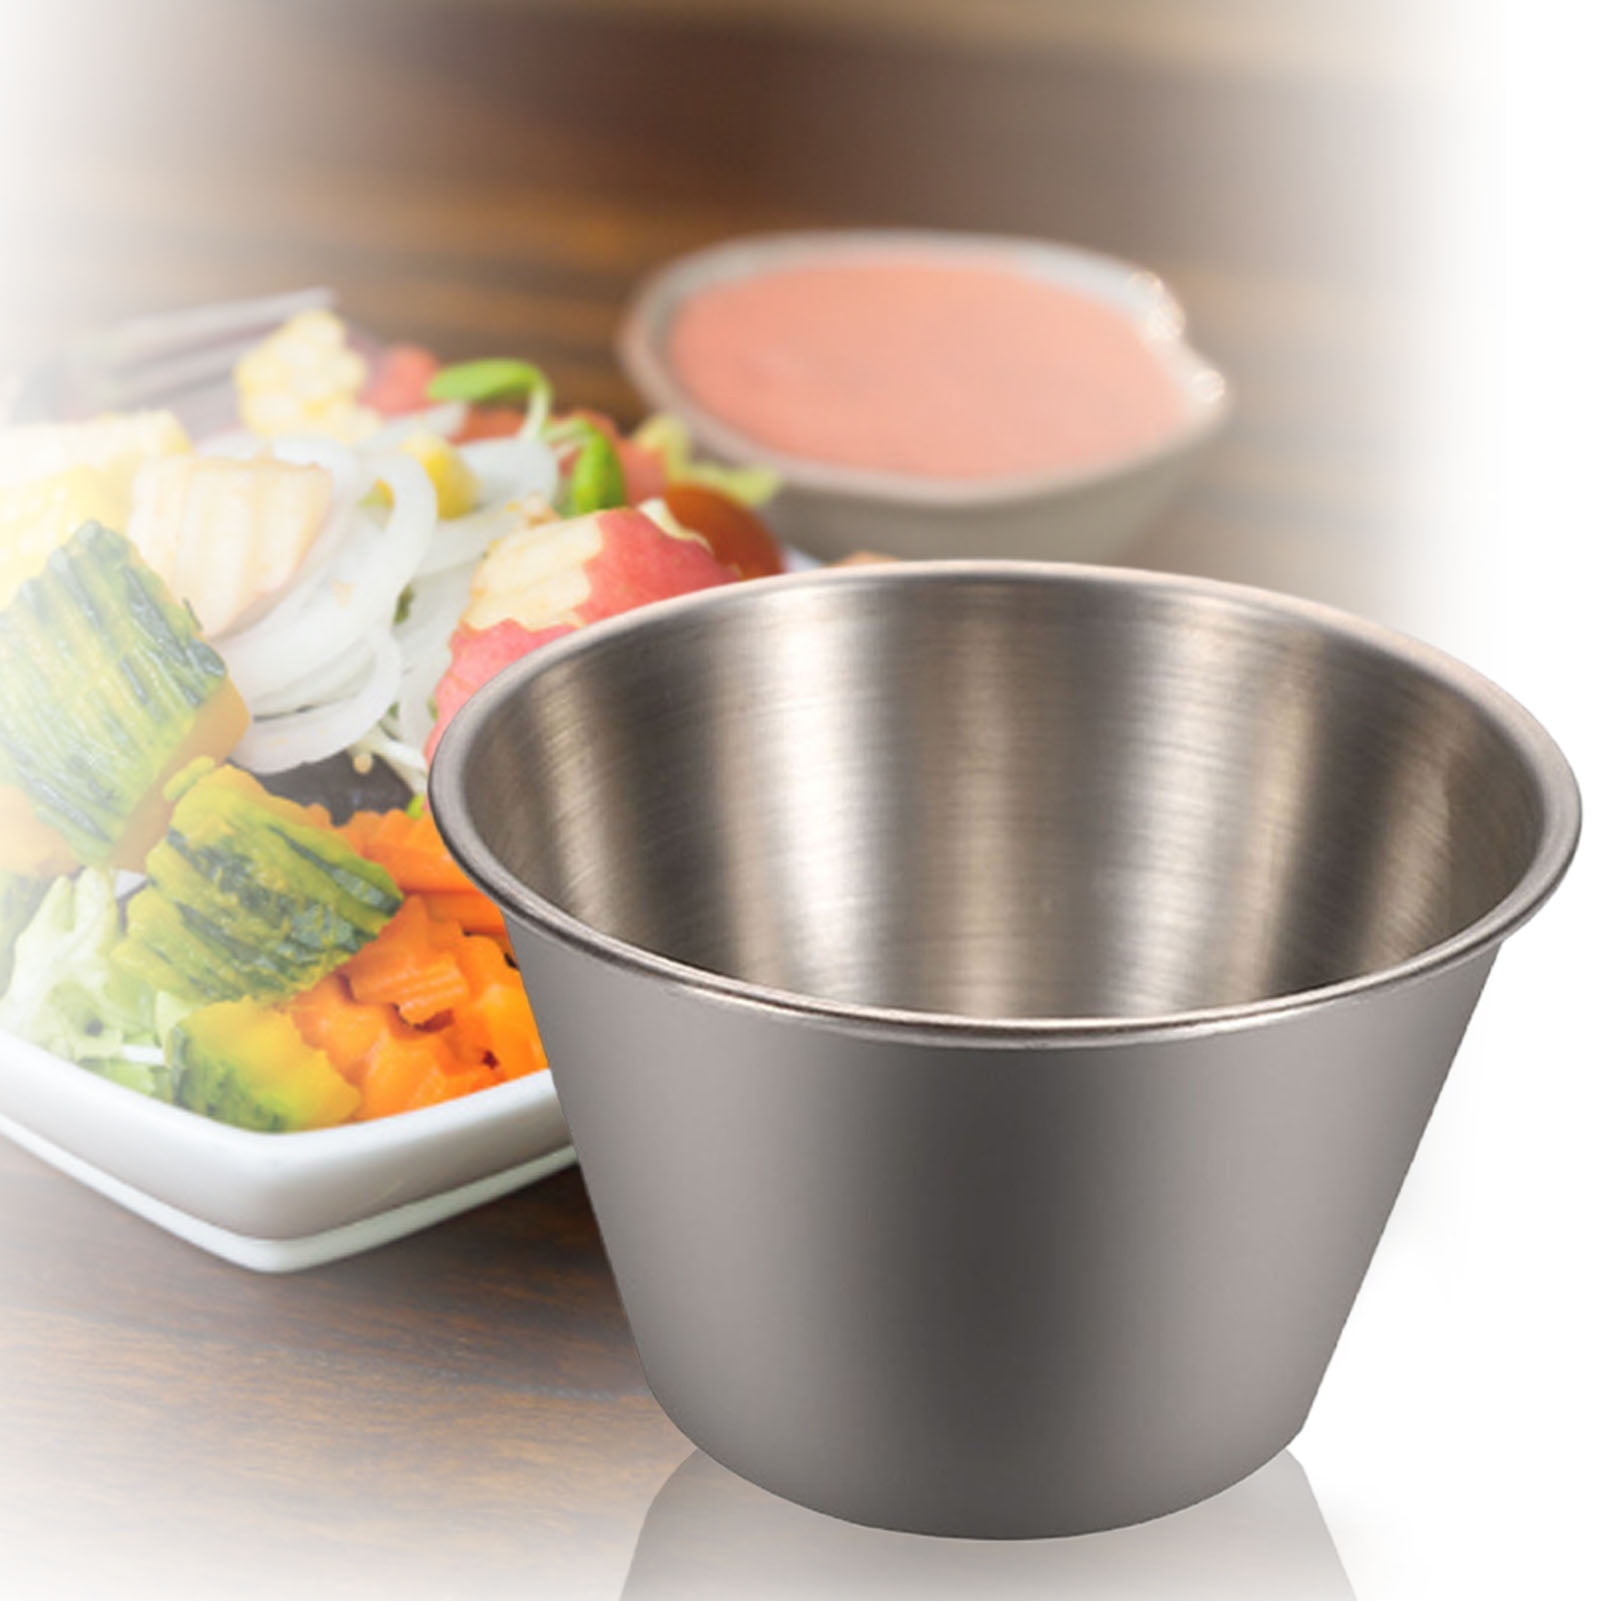 Stainless Steel Sauce Cups with Silicone Lids Reusable for Dipping Sauces  Salad Sauce Cups Stainless Steel for Restaurant Catering Stainless Steel Dipping  Sauce Cups Portion Cups Stainless Pink 